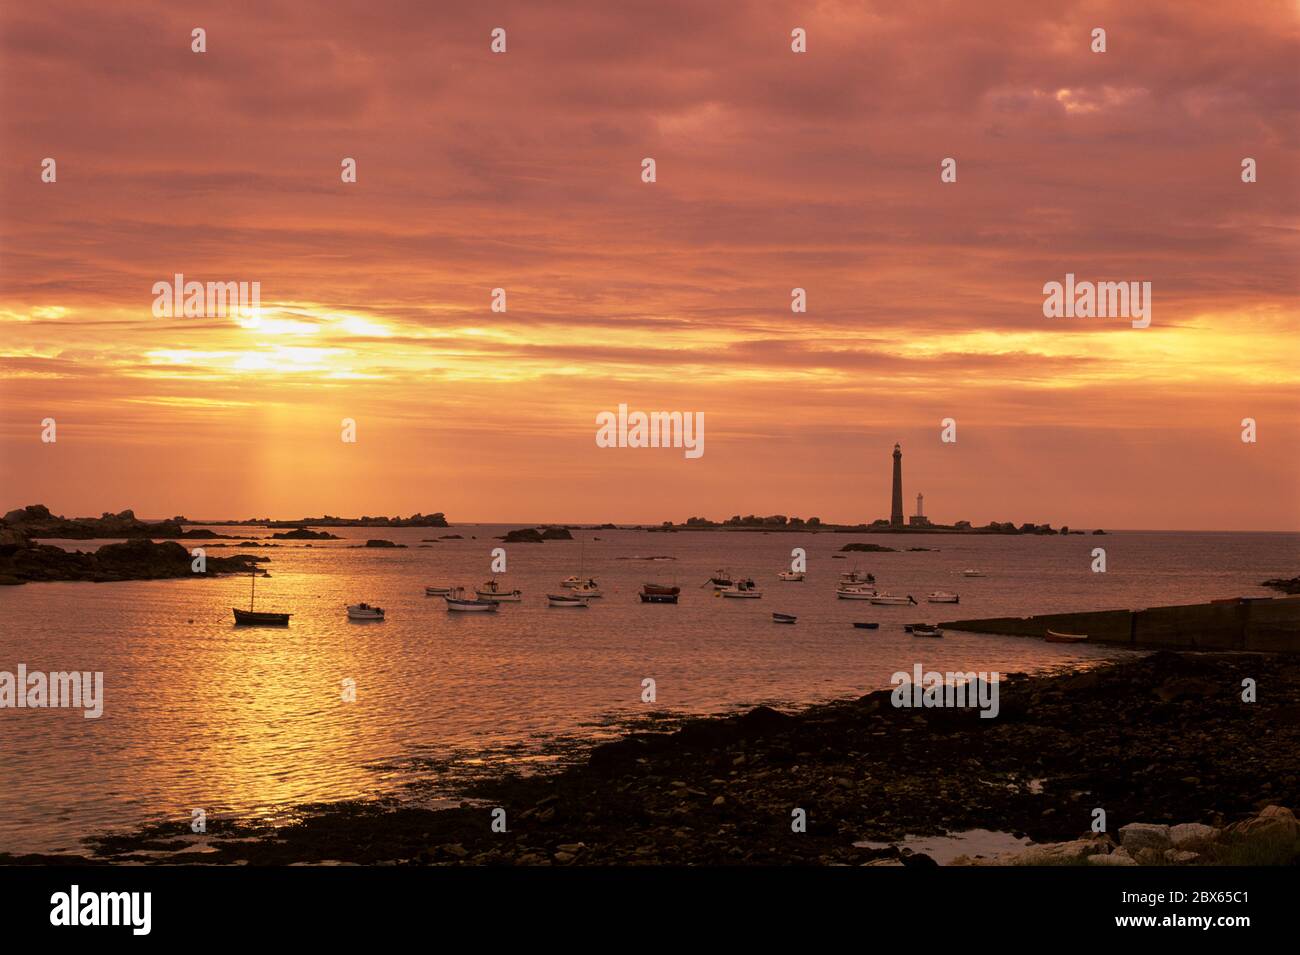 Boats and the Phare de la Vierge at sunset, Plouguerneau, Finistere, Brittany, France Stock Photo